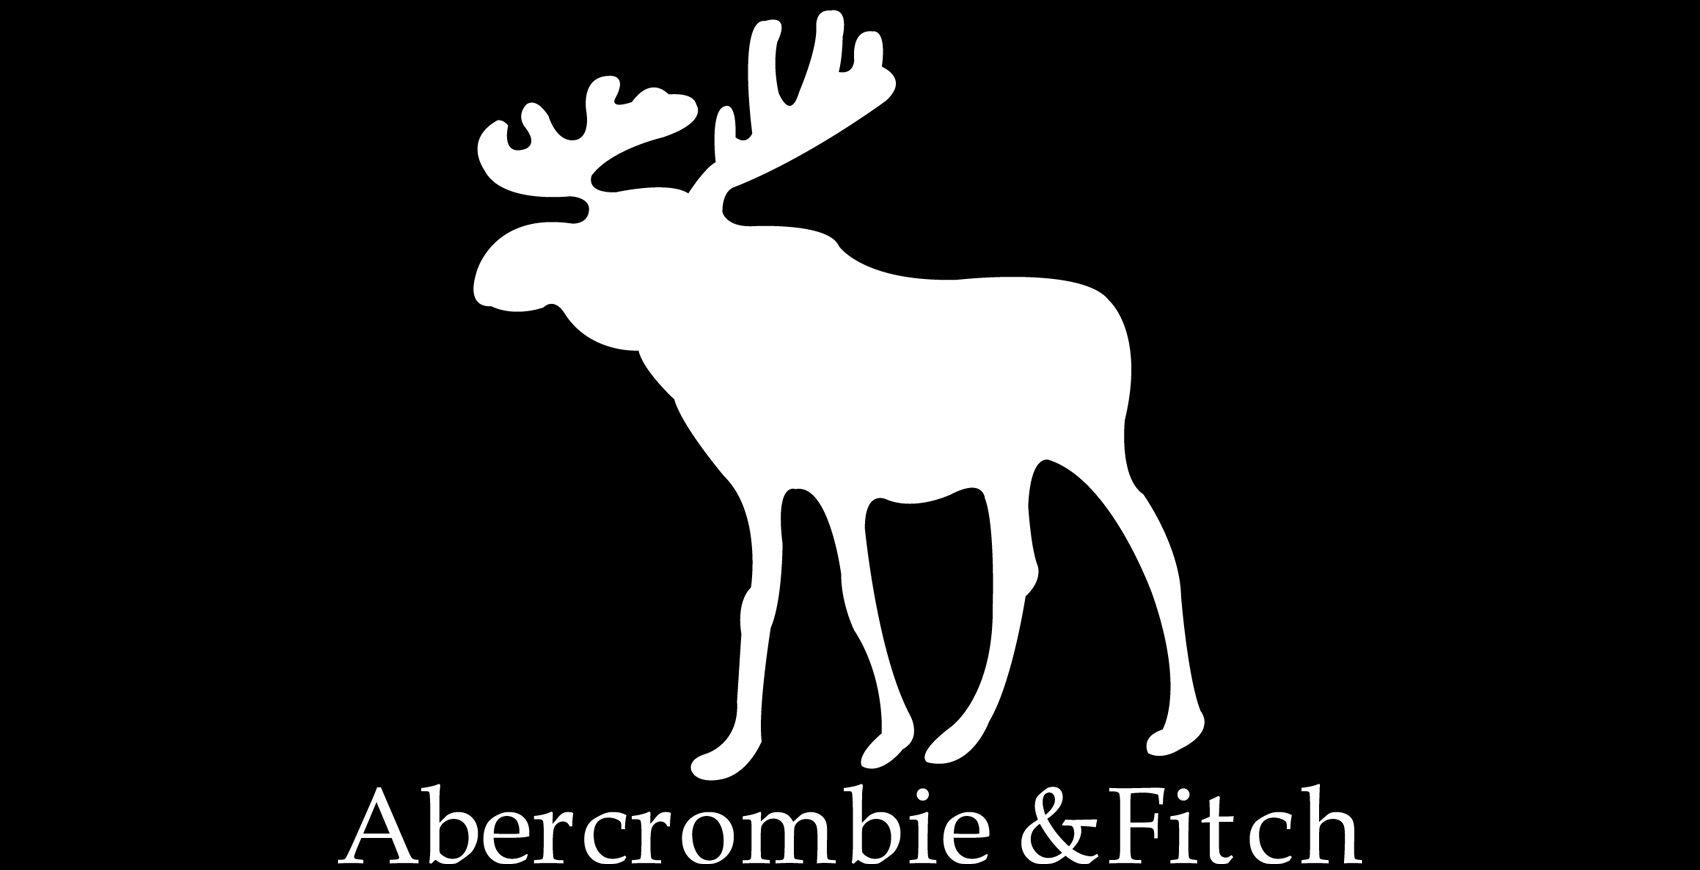 Abercrombie Moose Logo - Abercrombie and Fitch Logo, Abercrombie and Fitch Symbol Meaning ...